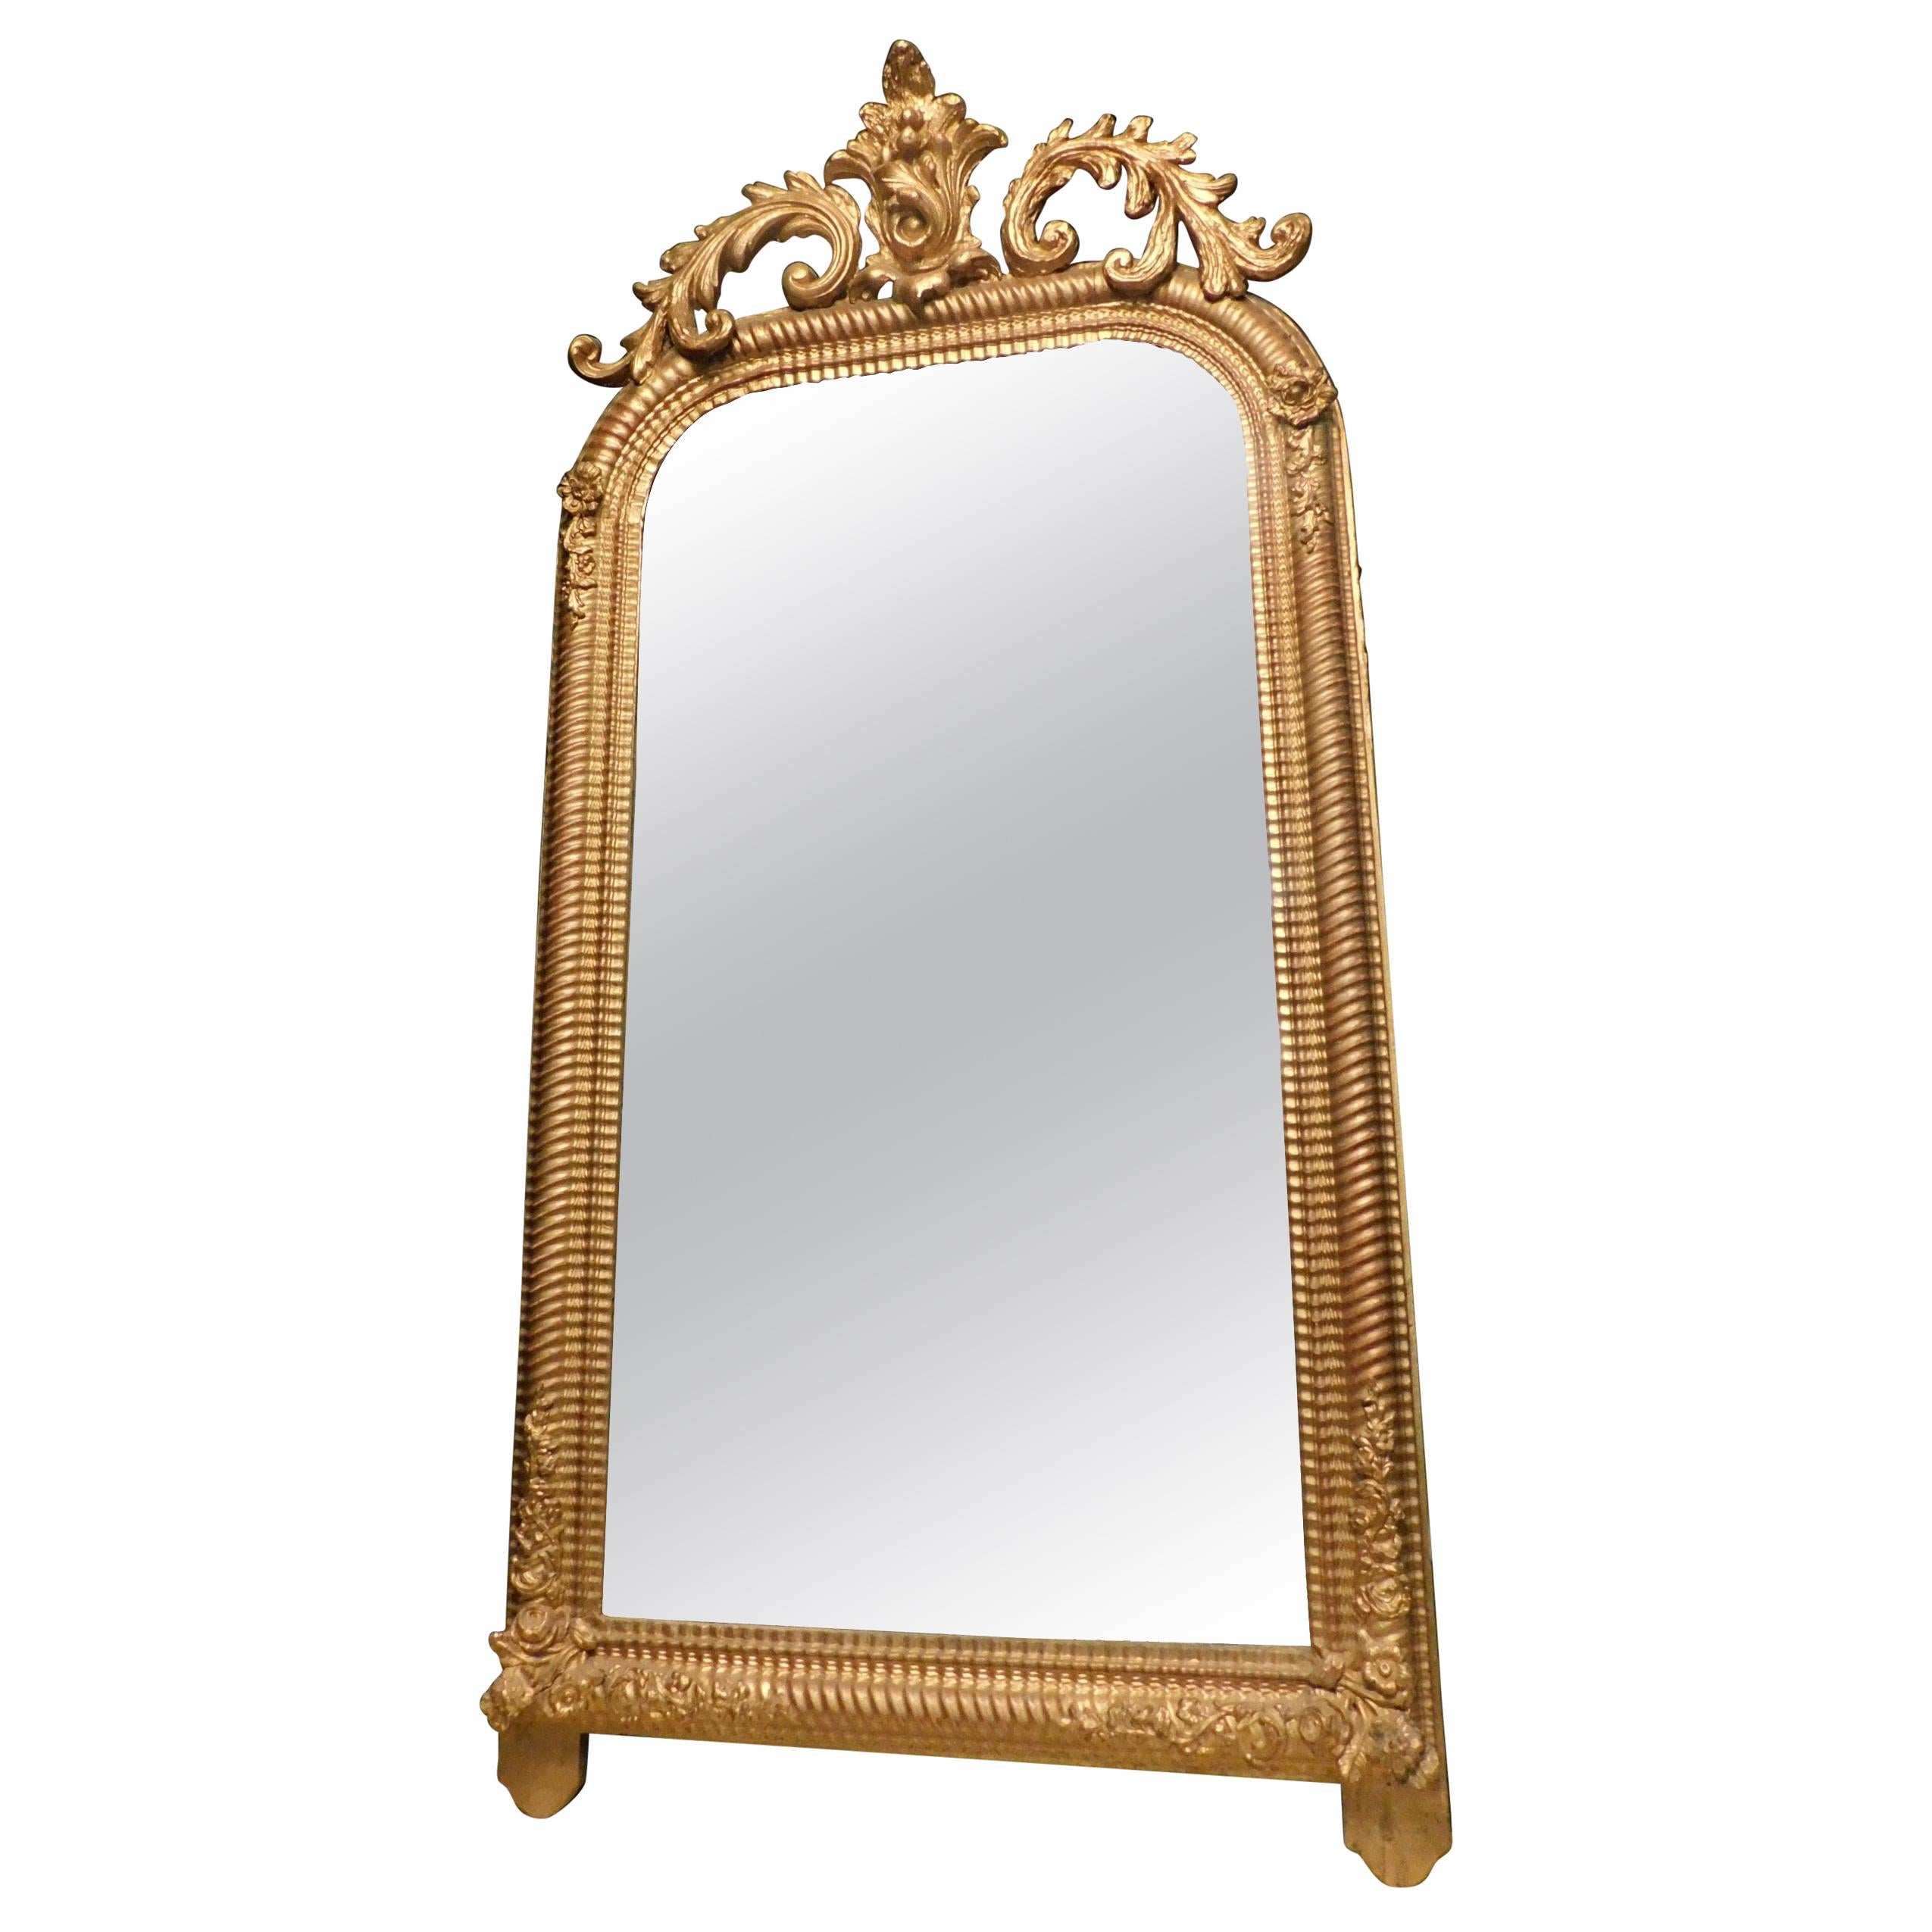 Antique Gilded Mirror with Sculpted Floreal Rib, 19th Century, Italy For Sale